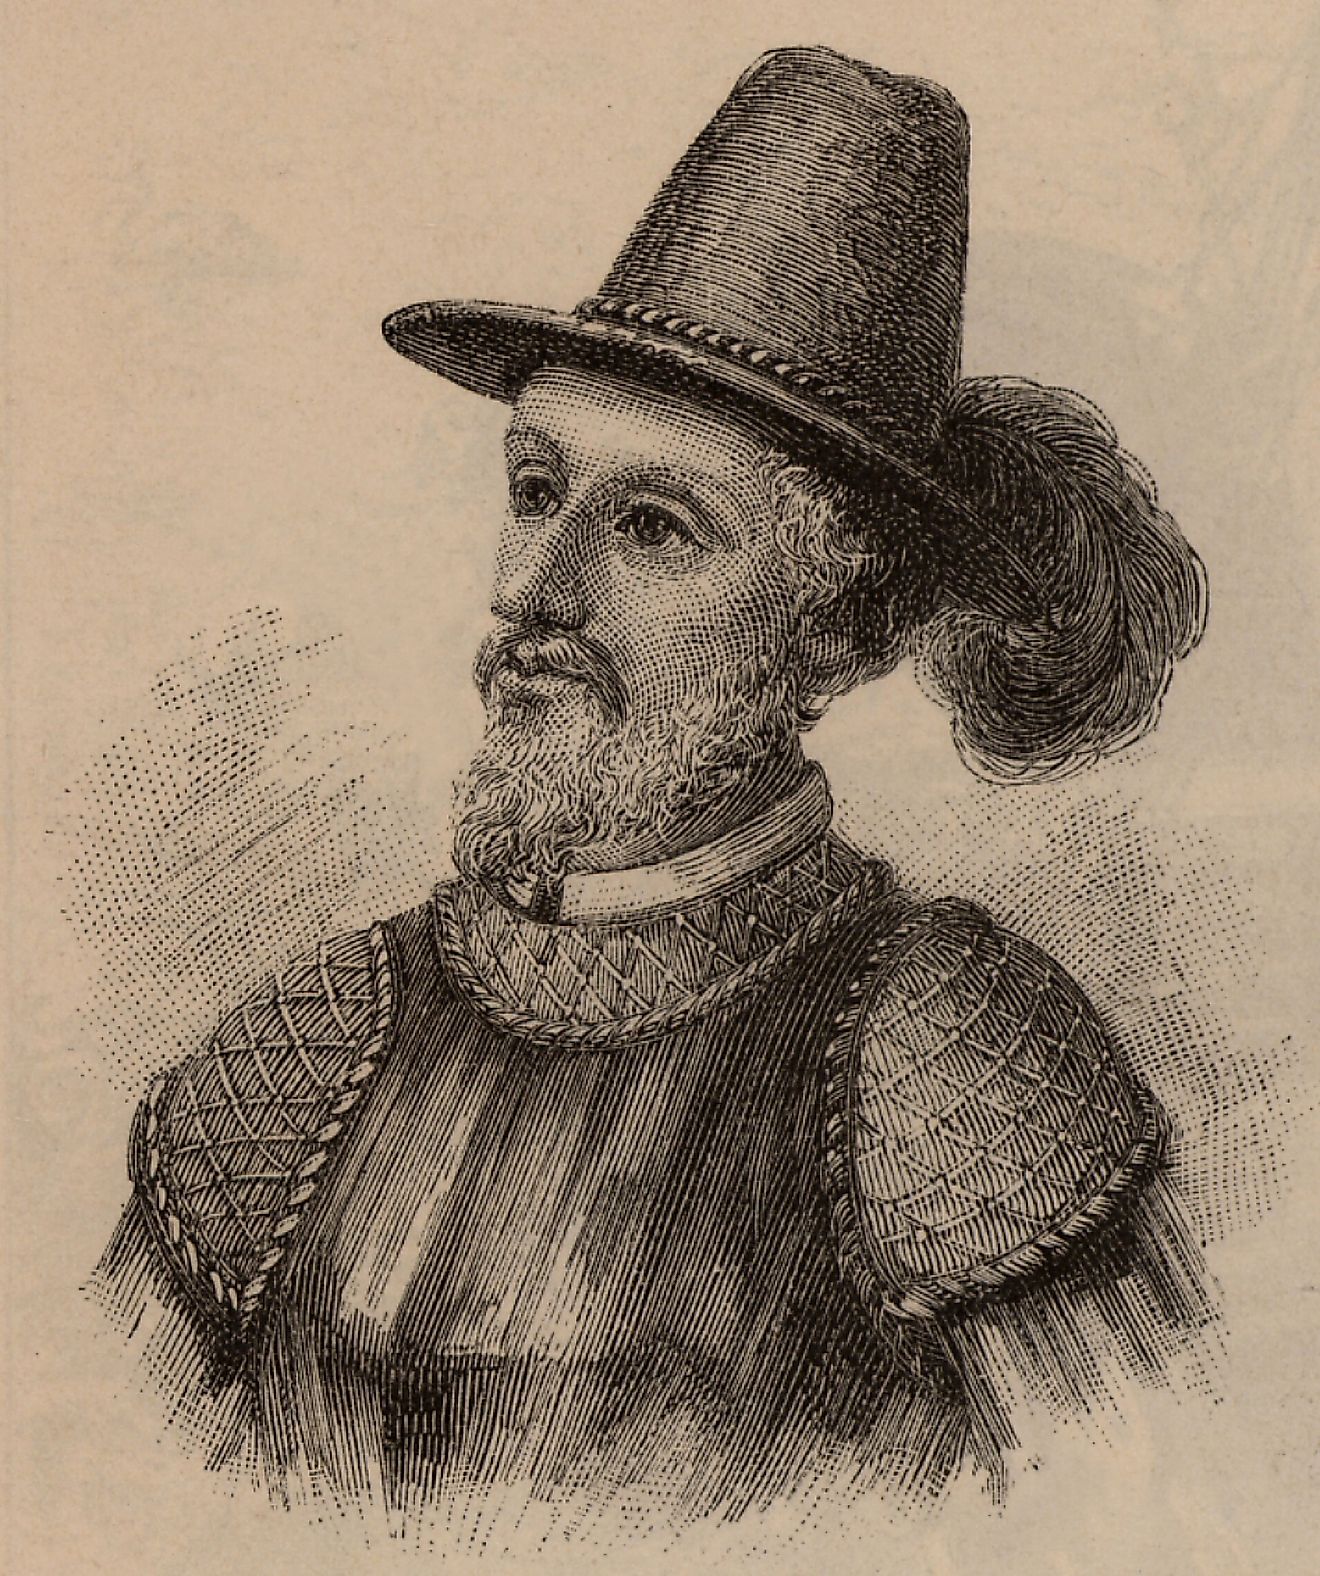 Juan Ponce de León led the first European expedition into Florida, and was appointed as the first Governor of Spanish Puerto Rico.